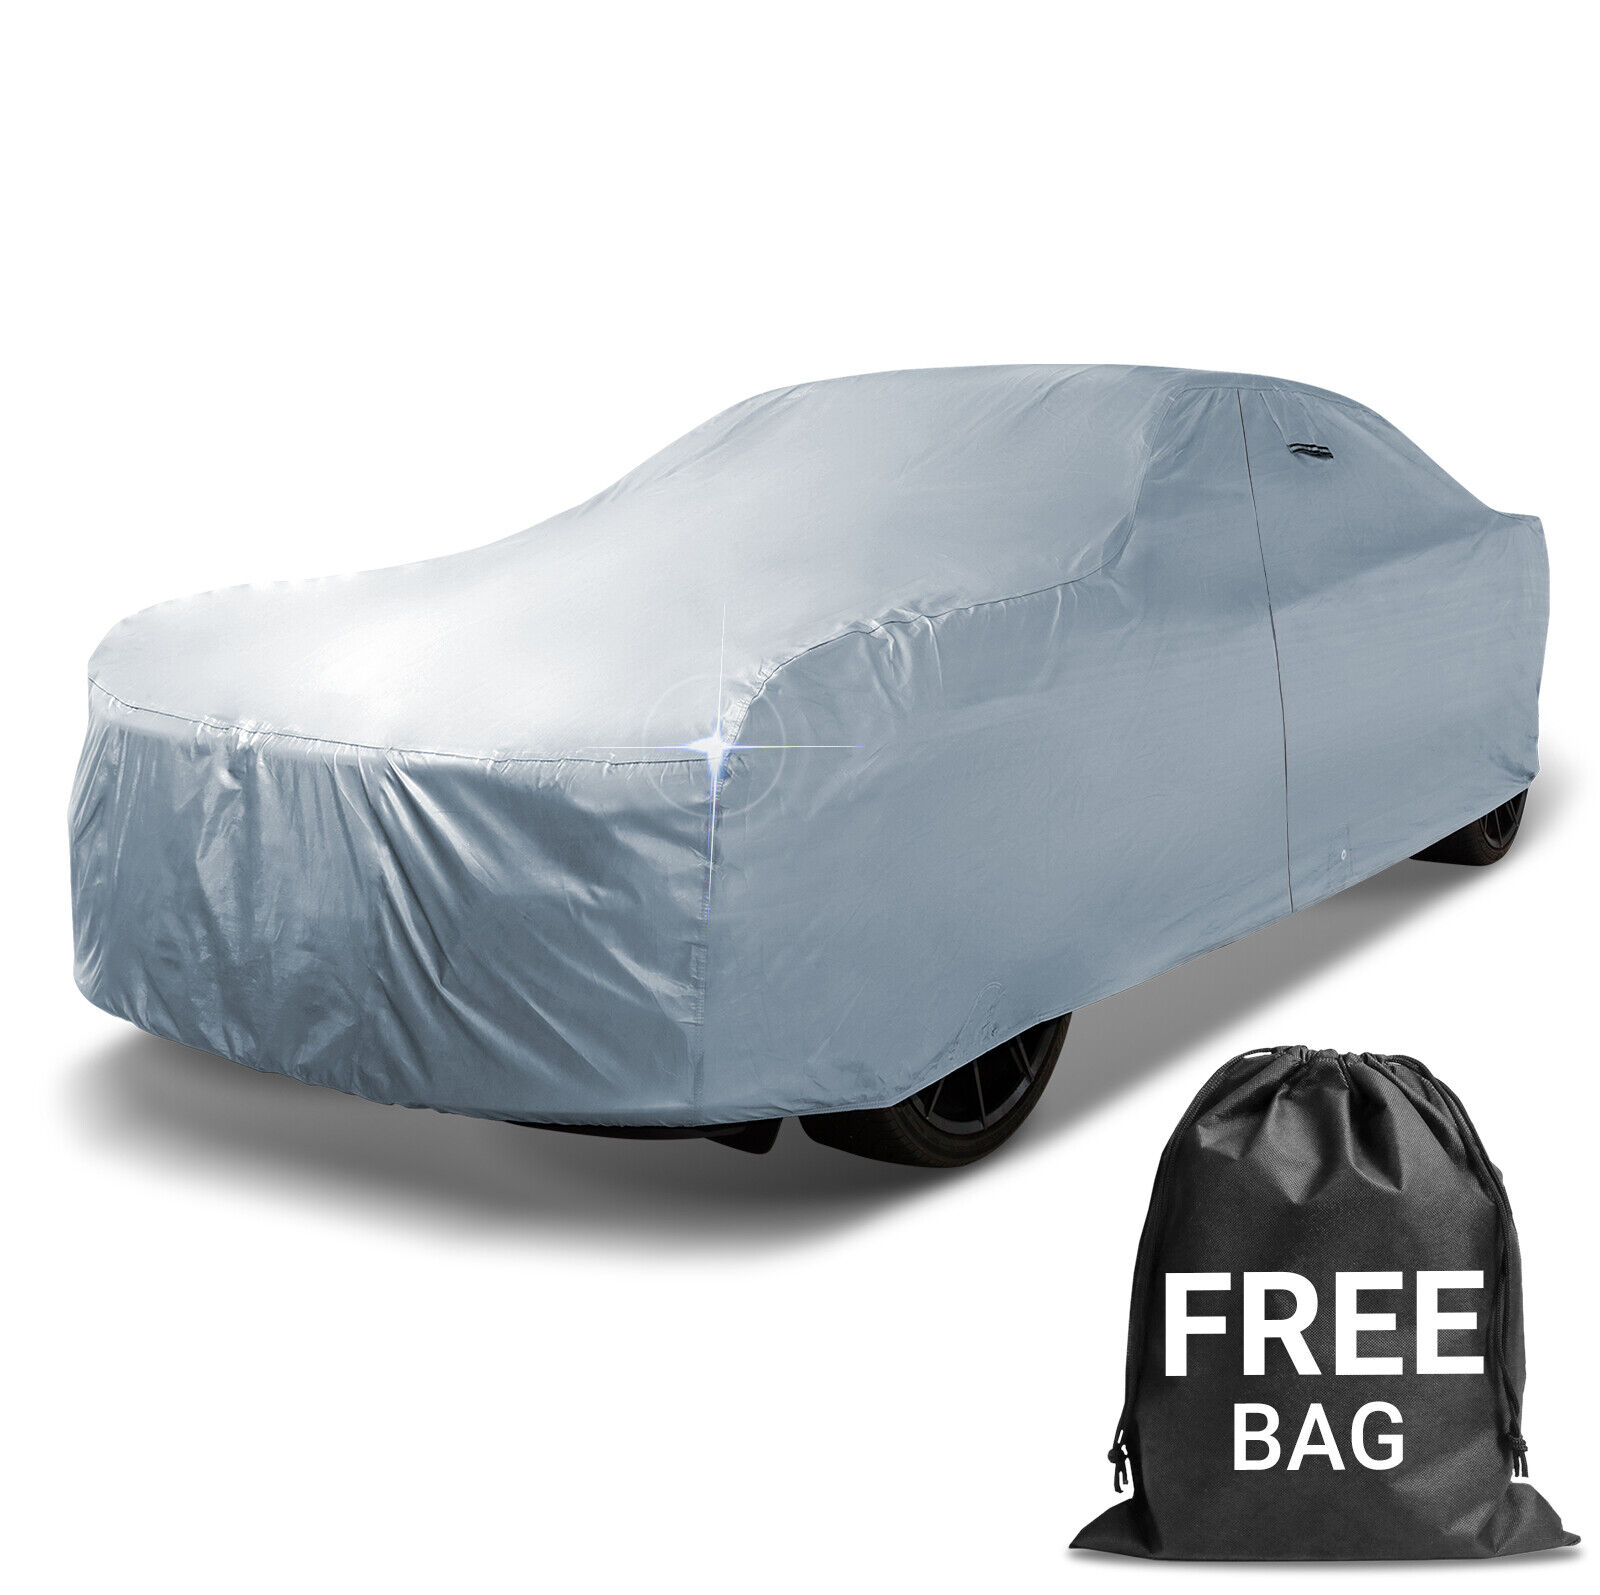 PONTIAC [CATALINA] Custom Waterproof Outdoor Car Cover - All Weather Protection